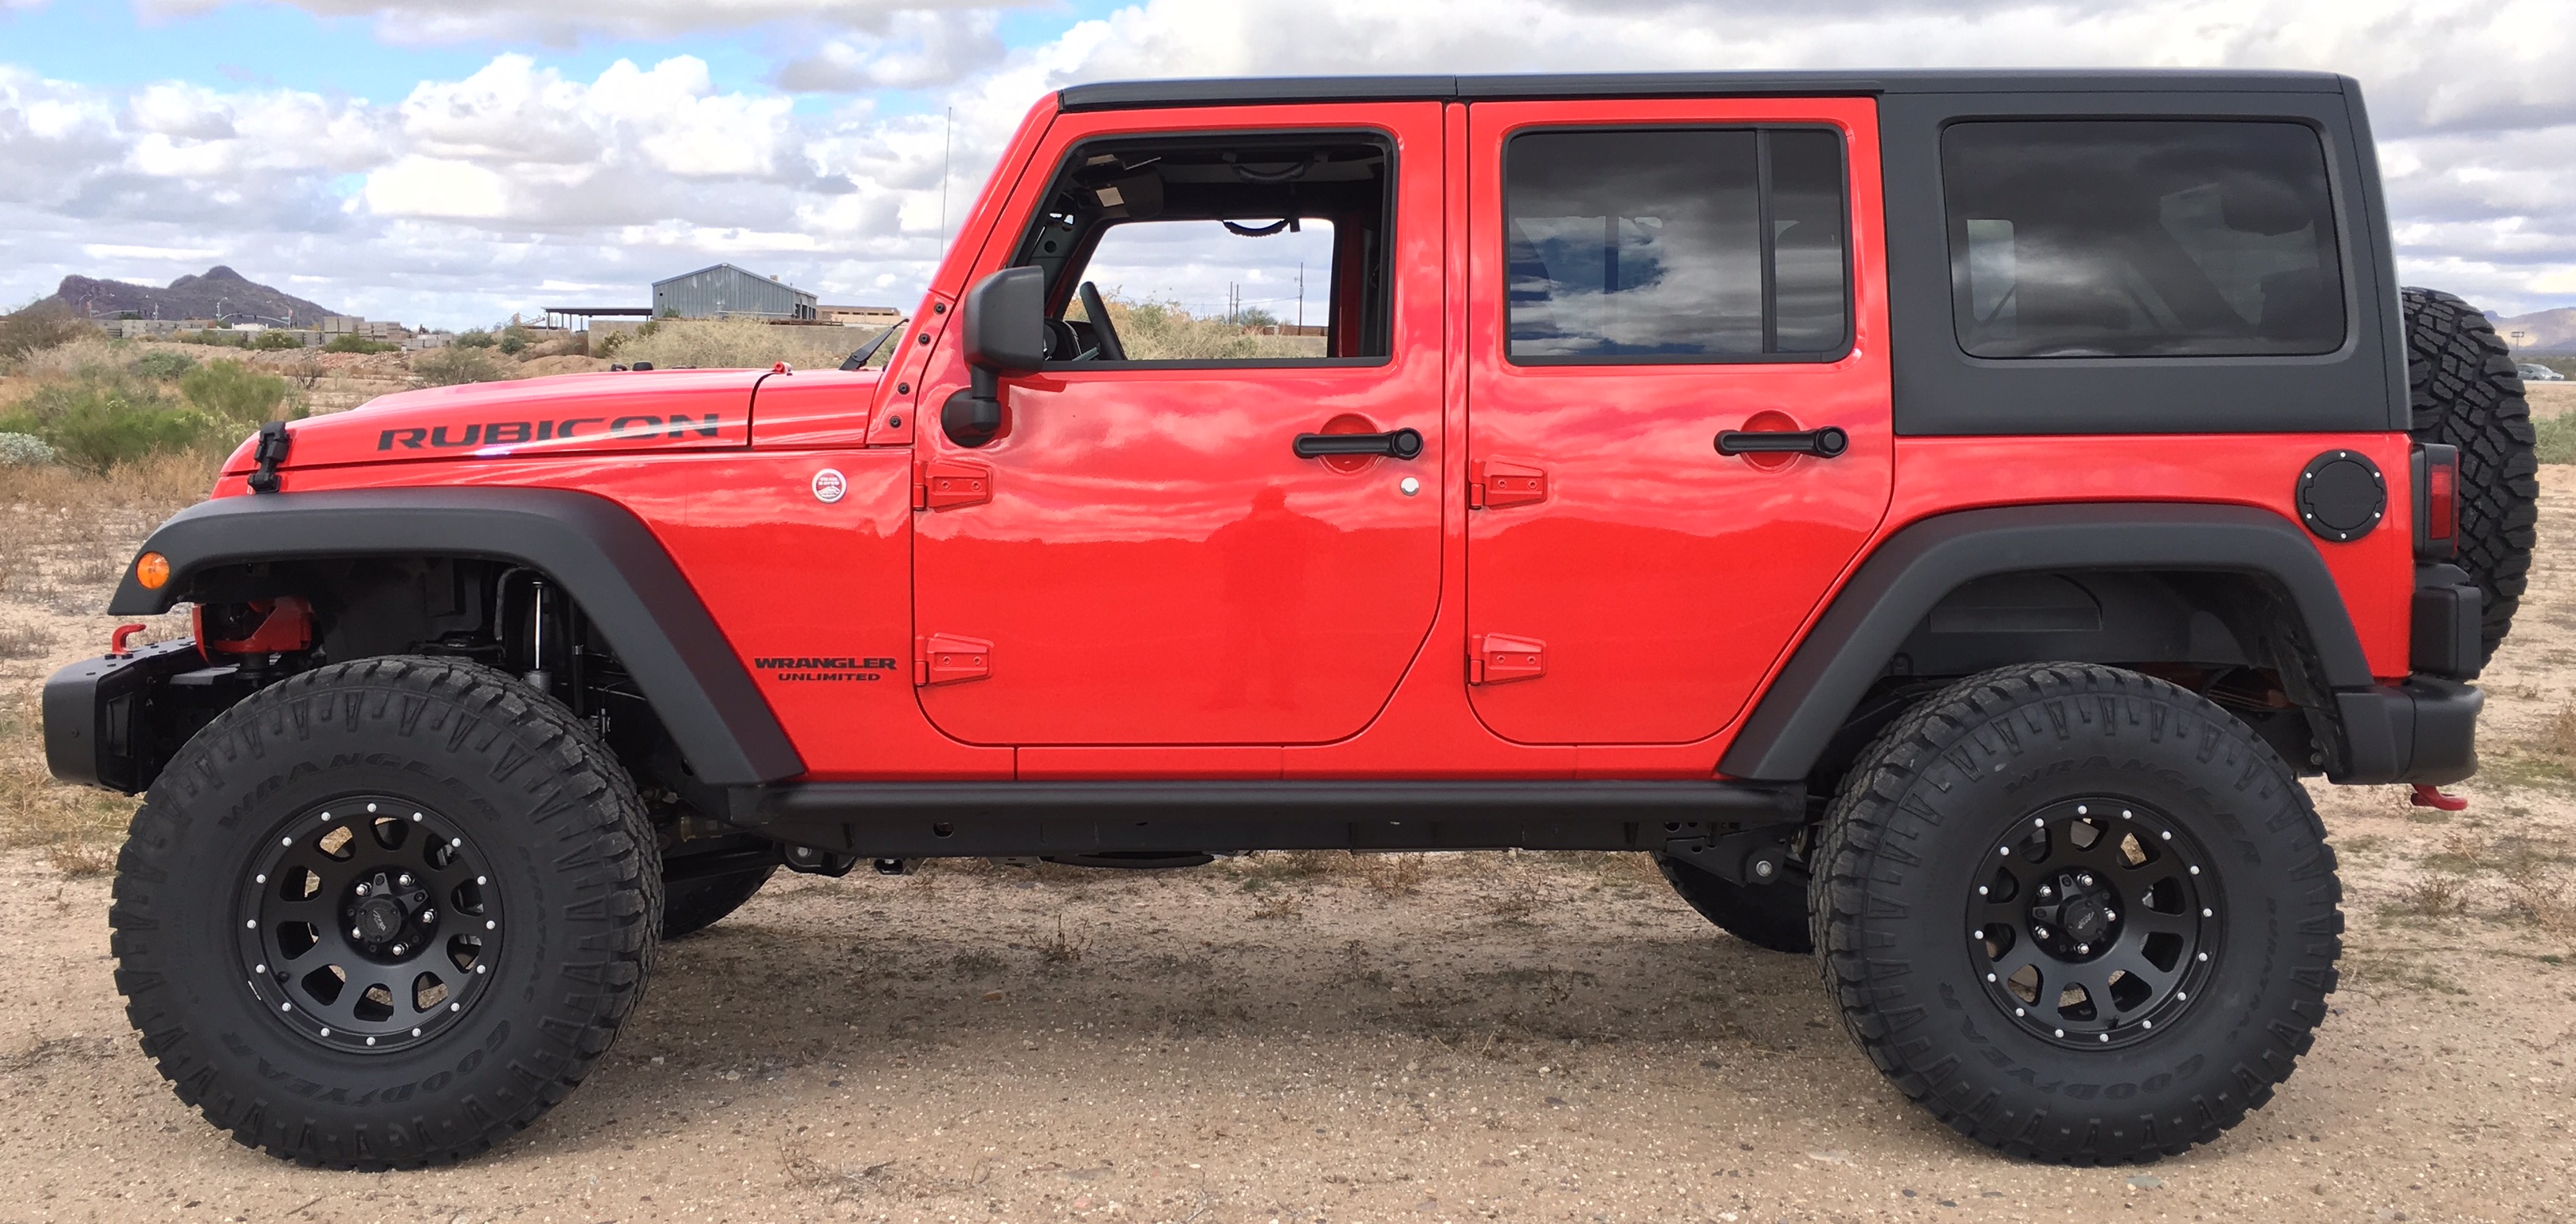 Firecracker Red - Page 4  - The top destination for Jeep JK  and JL Wrangler news, rumors, and discussion